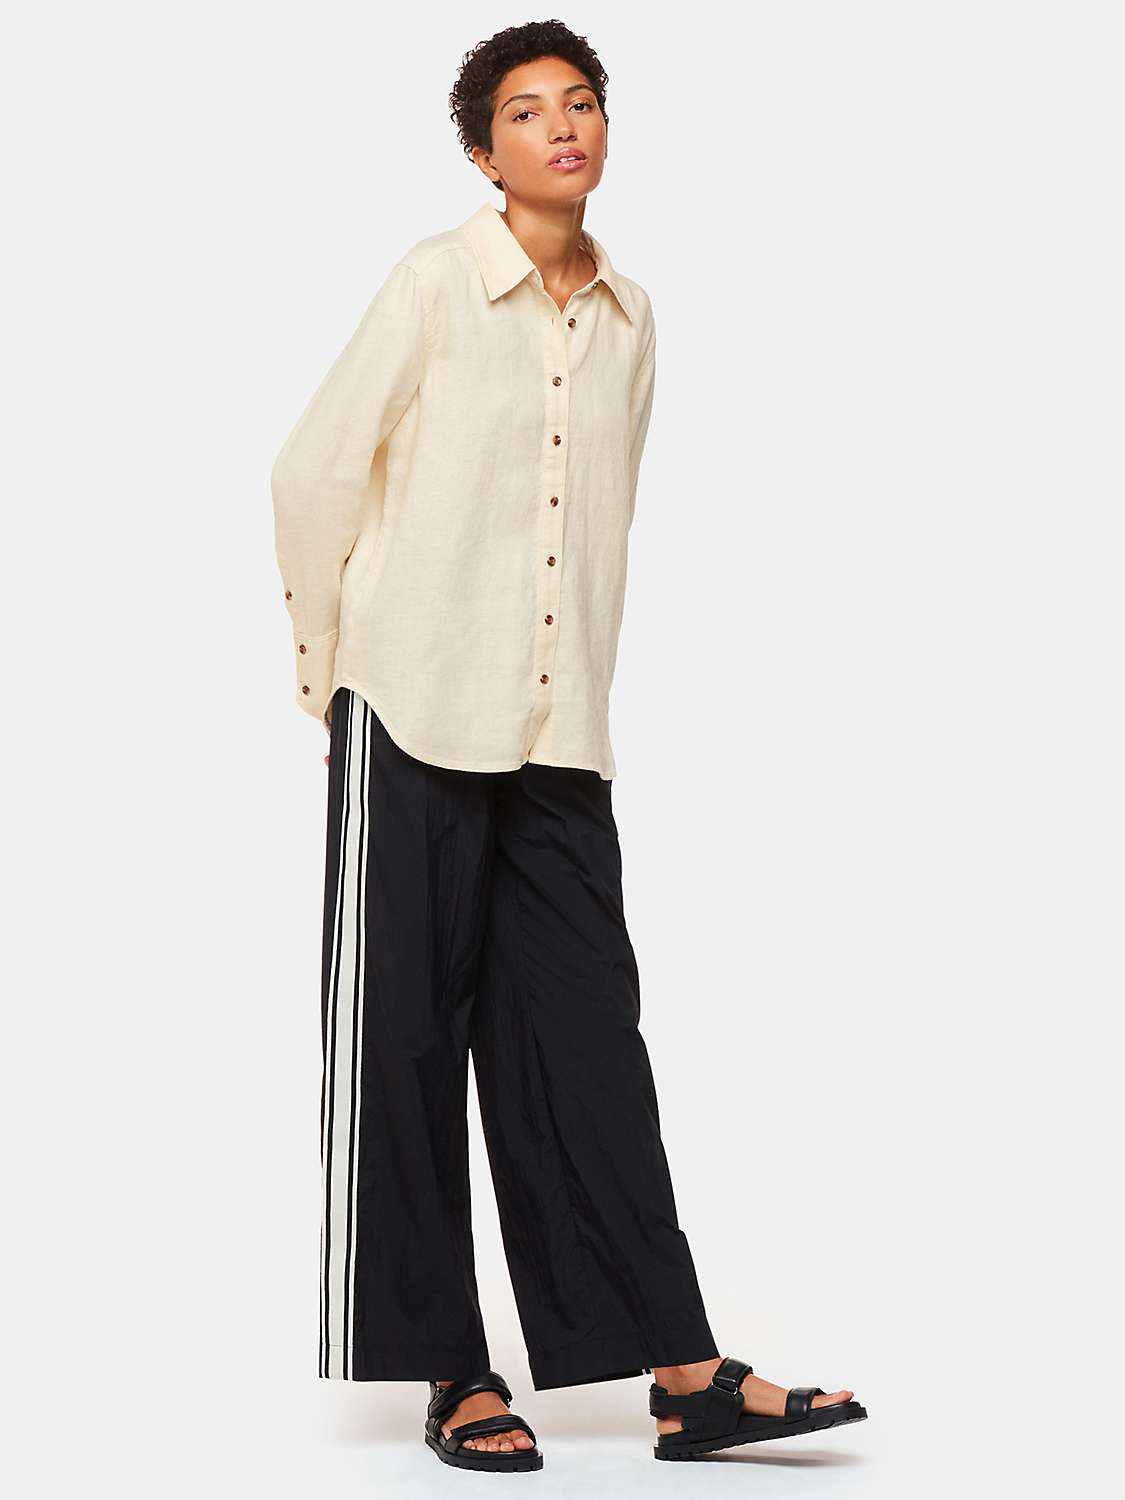 Buy Whistles Relaxed Fit Linen Shirt, Ivory Online at johnlewis.com